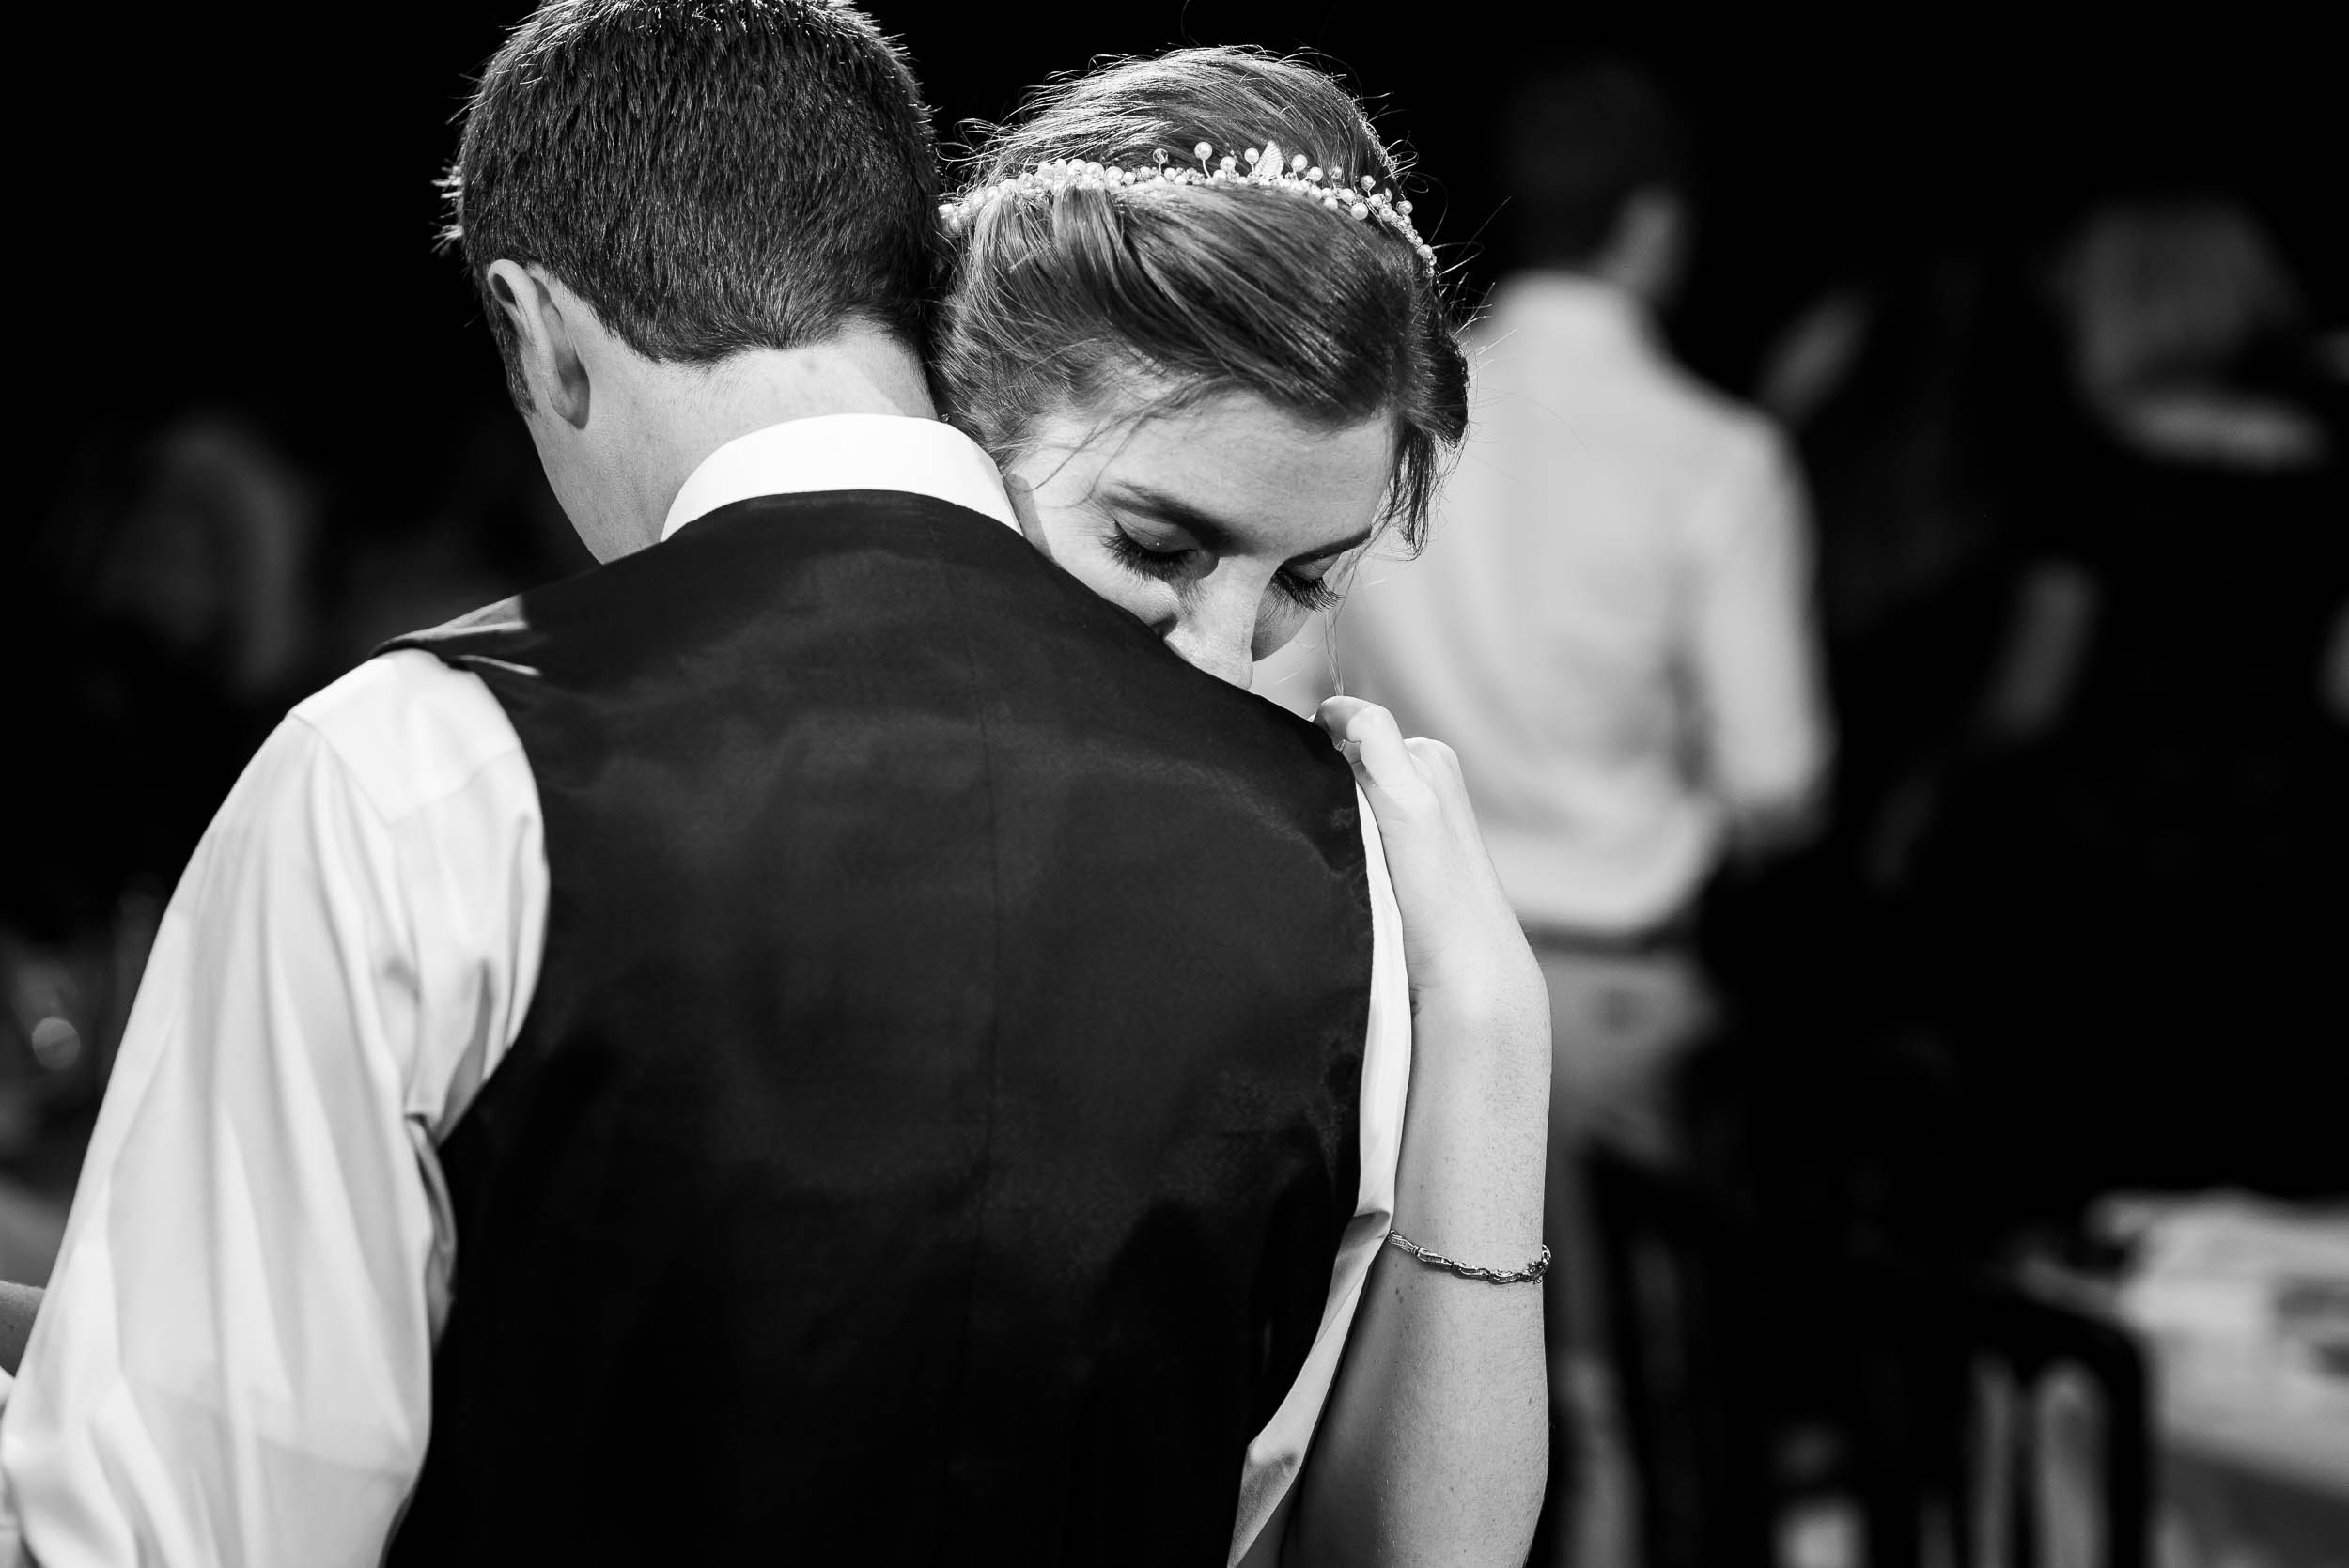 Bride and groom share a moment together during their Newberry Library wedding Chicago.